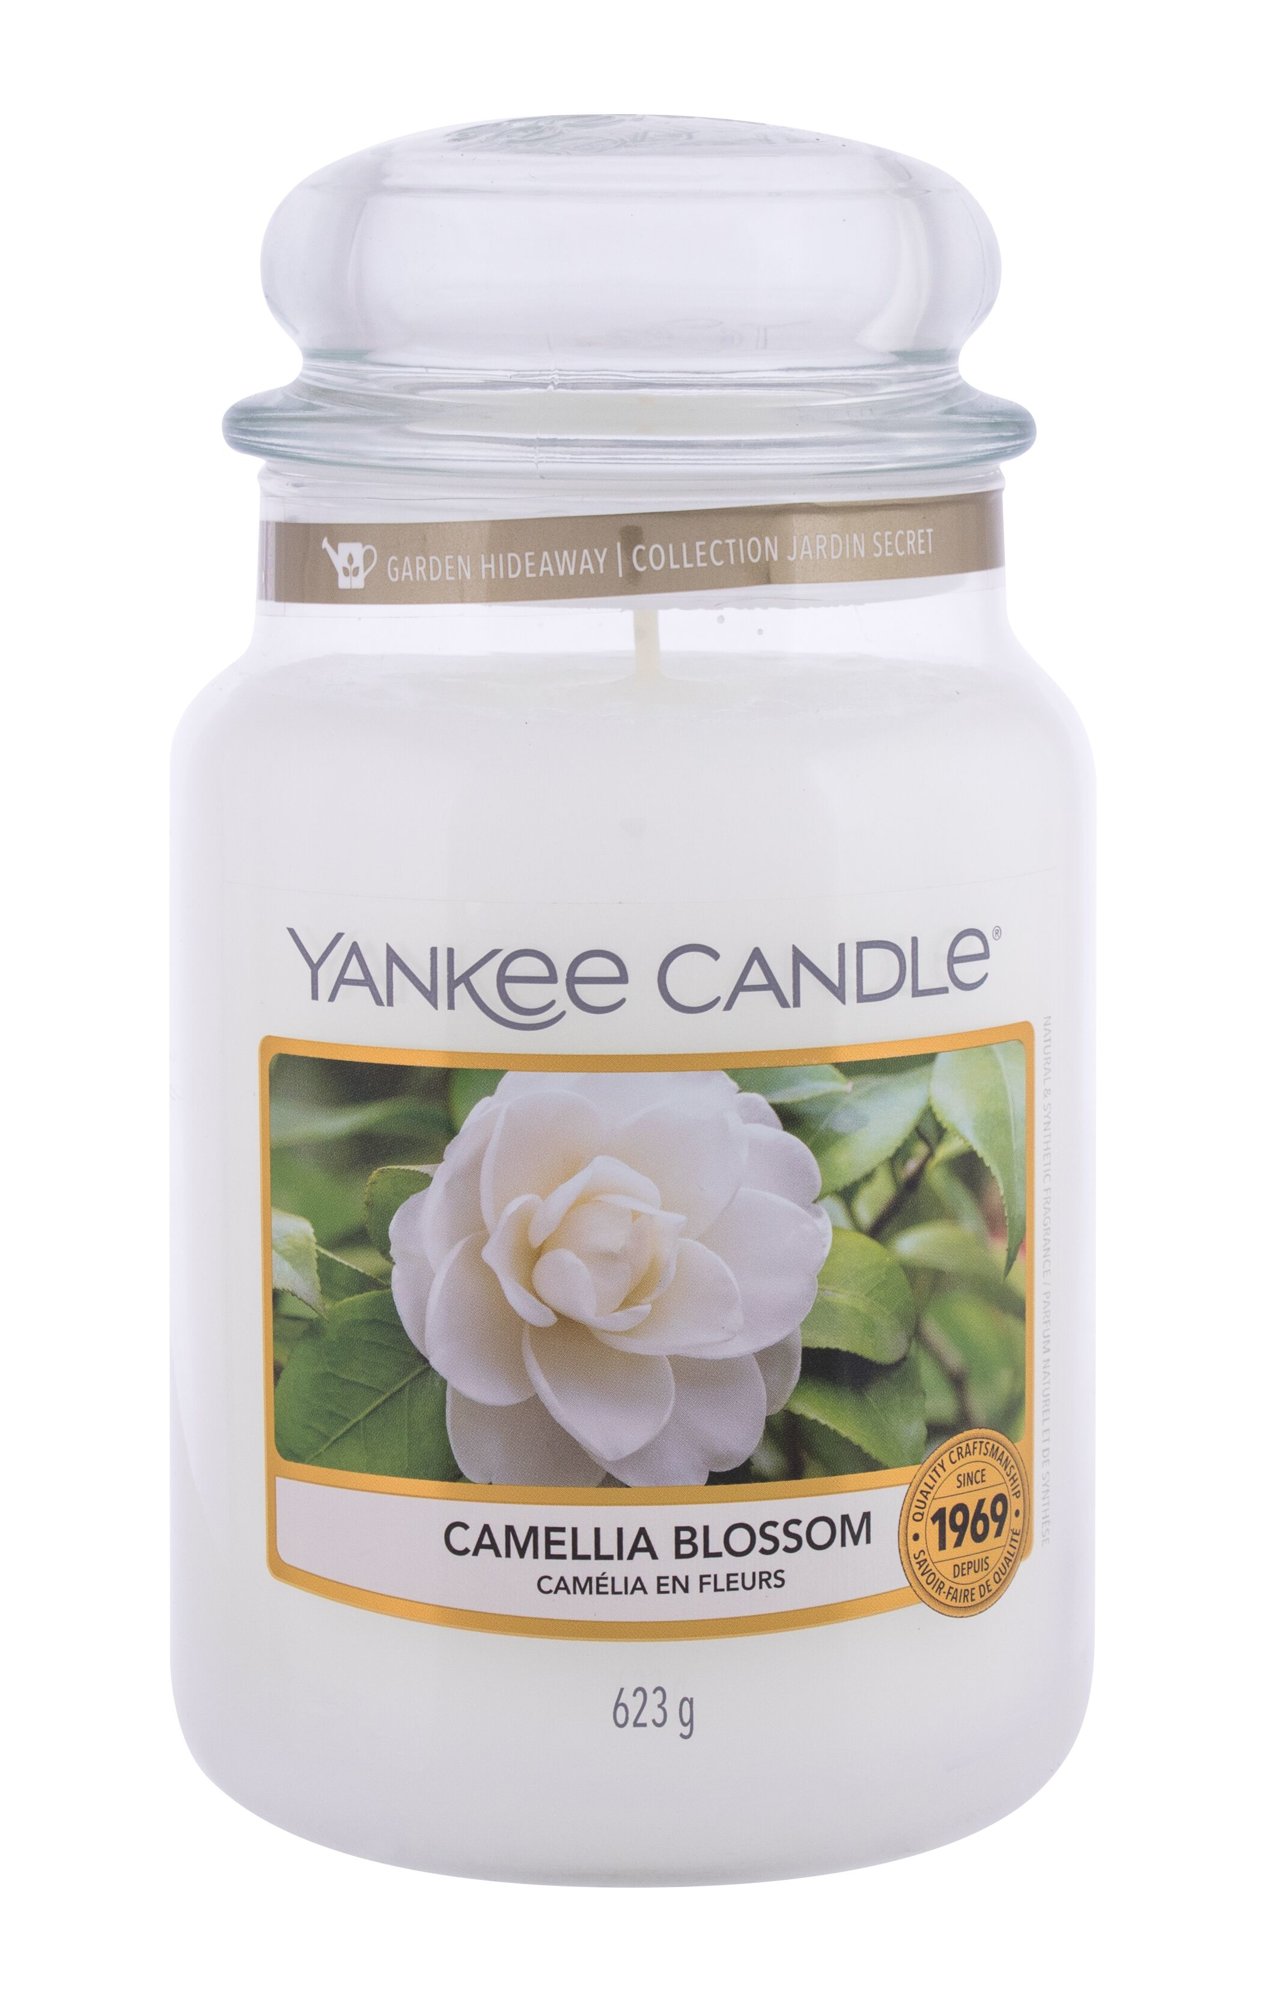 Yankee Candle Camellia Blossom 623g Kvepalai Unisex Scented Candle